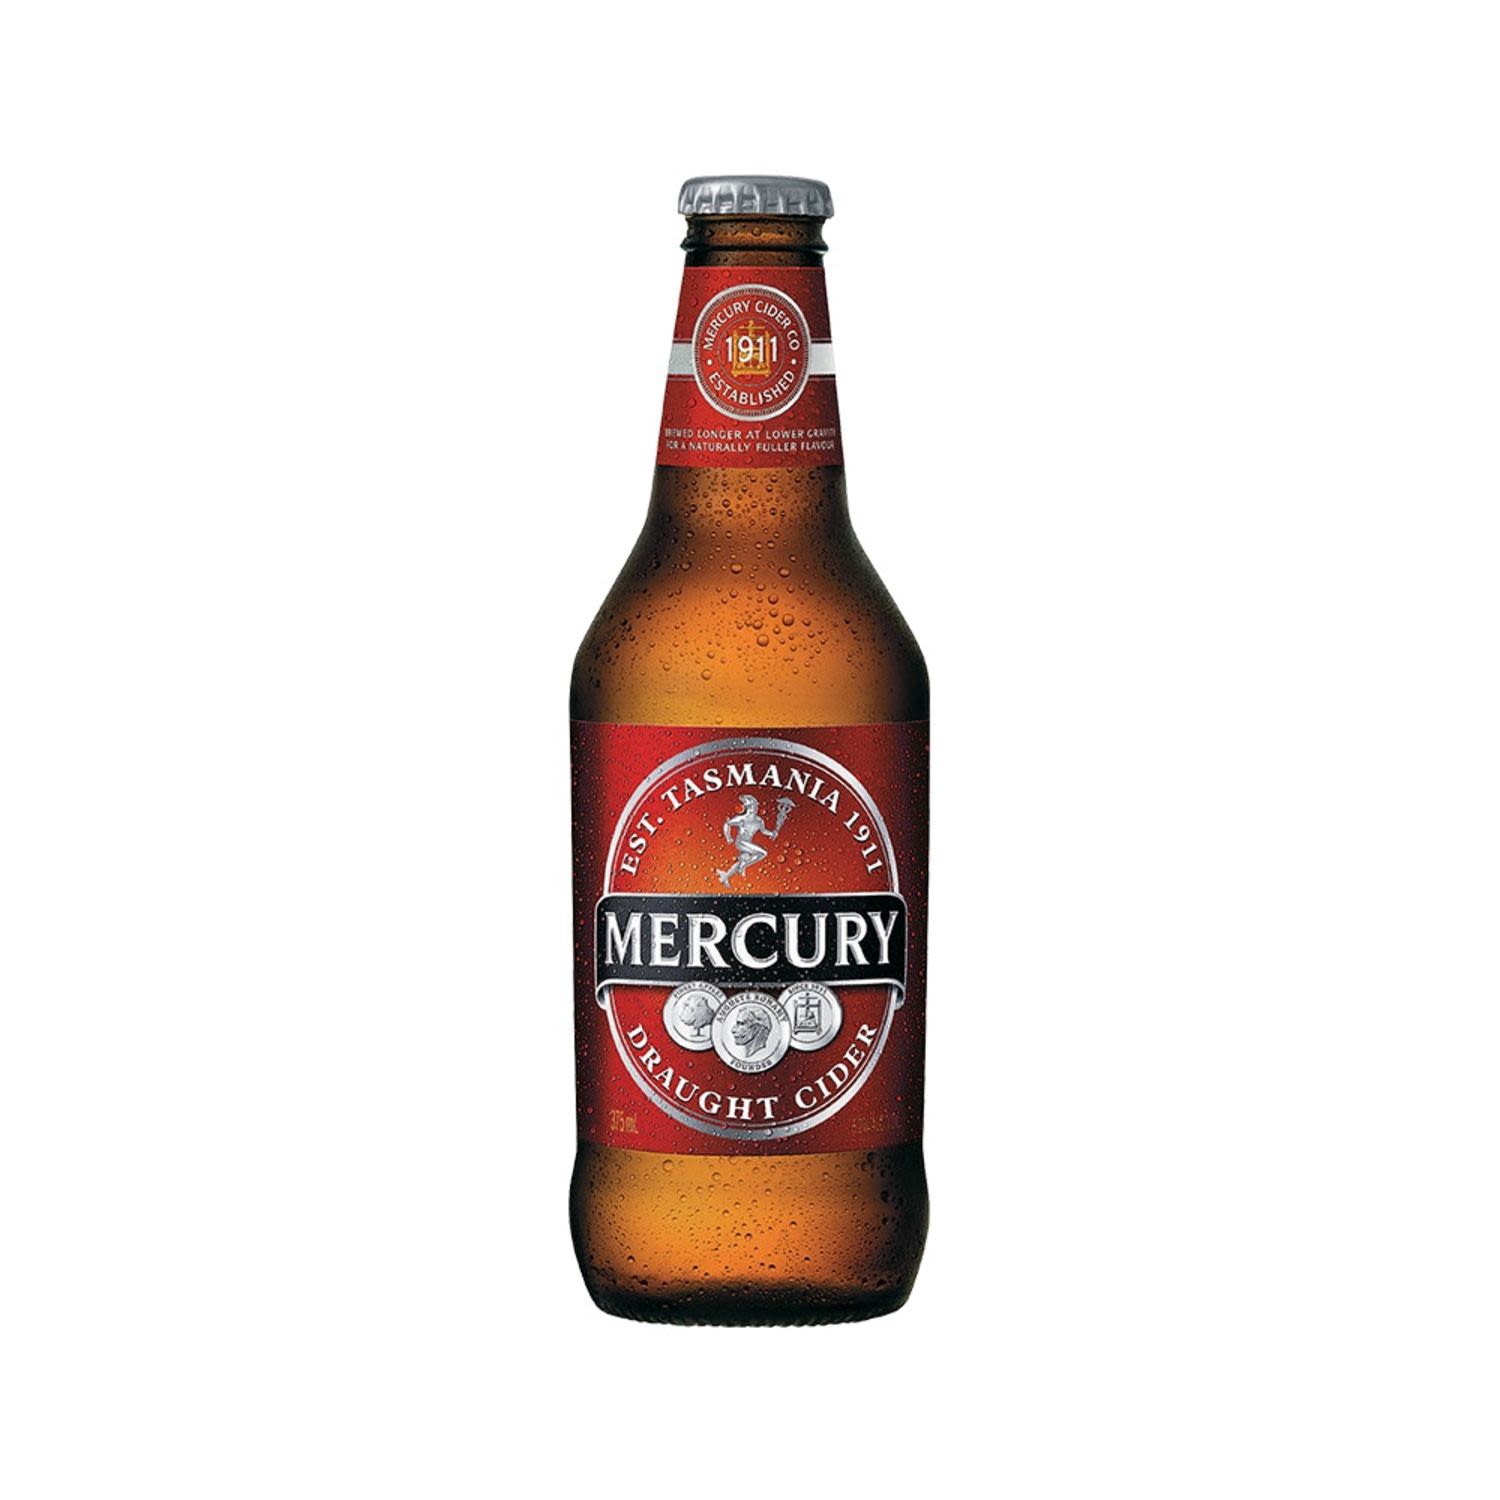 Made in Tasmania, Mercury Draught Cider is the perfect balance of a sweet apple and the cleansing acidity. A great all round Cider.<br /> <br />Alcohol Volume: 5.20%<br /><br />Pack Format: Bottle<br /><br />Standard Drinks: 1.5</br /><br />Pack Type: Bottle<br /><br />Country of Origin: Australia<br />